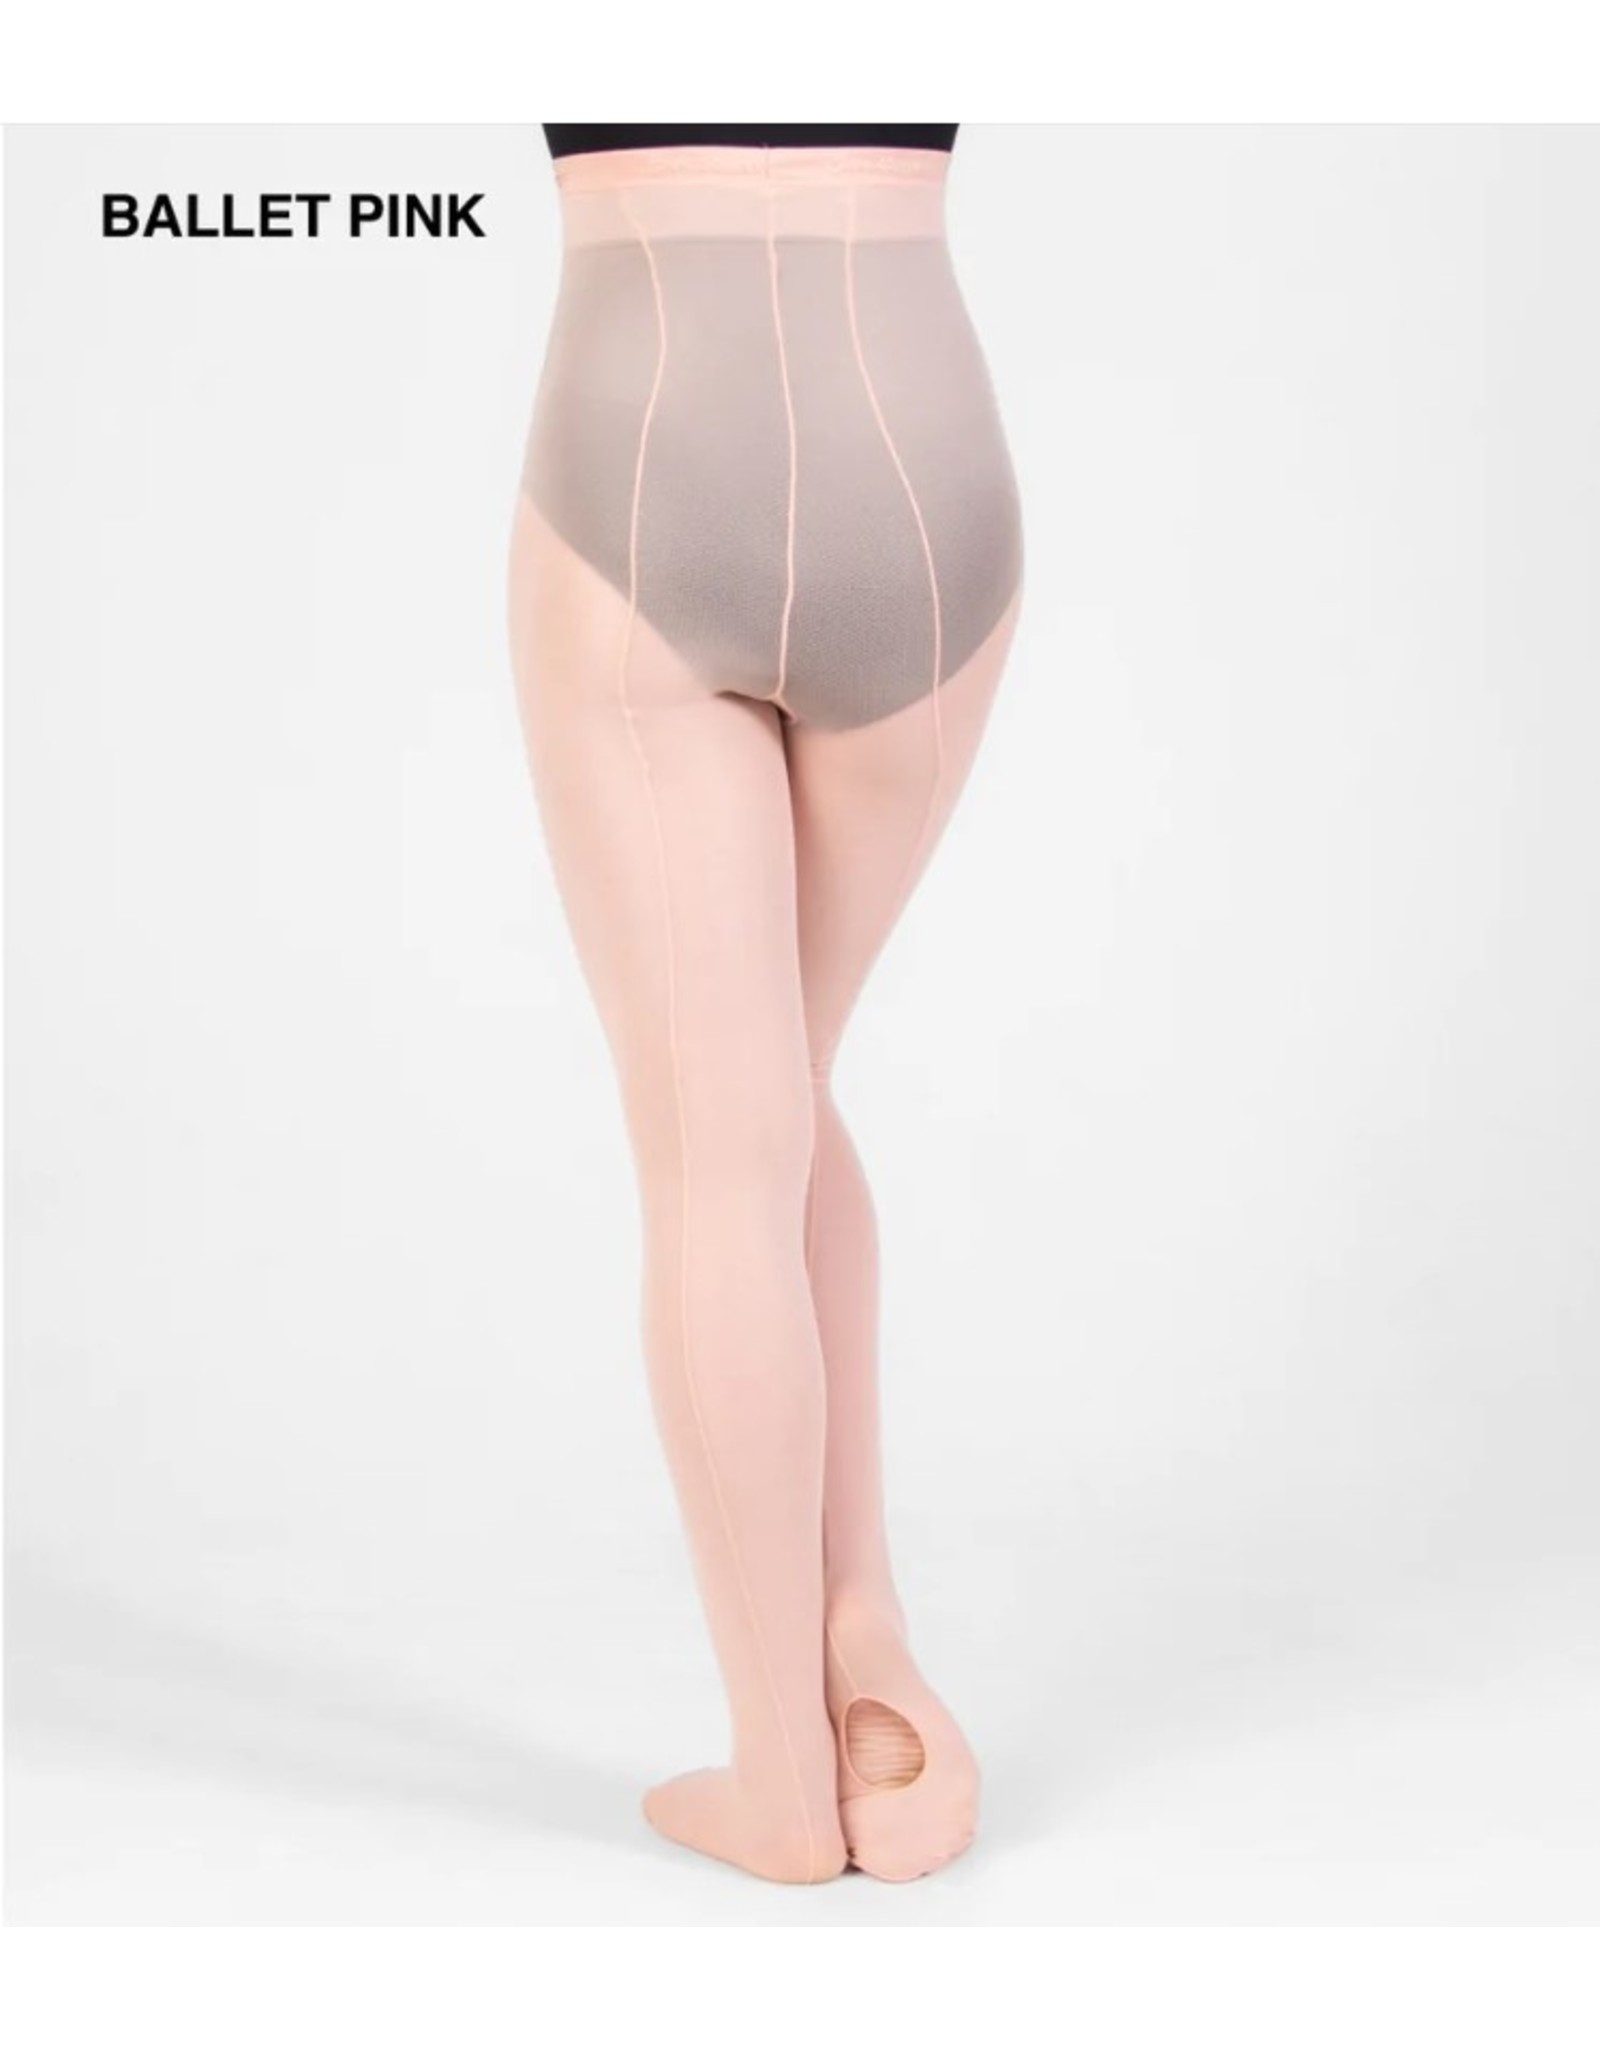 Body Wrappers TotalSTRETCH Mesh Back Seam Convertible Tights (A45)